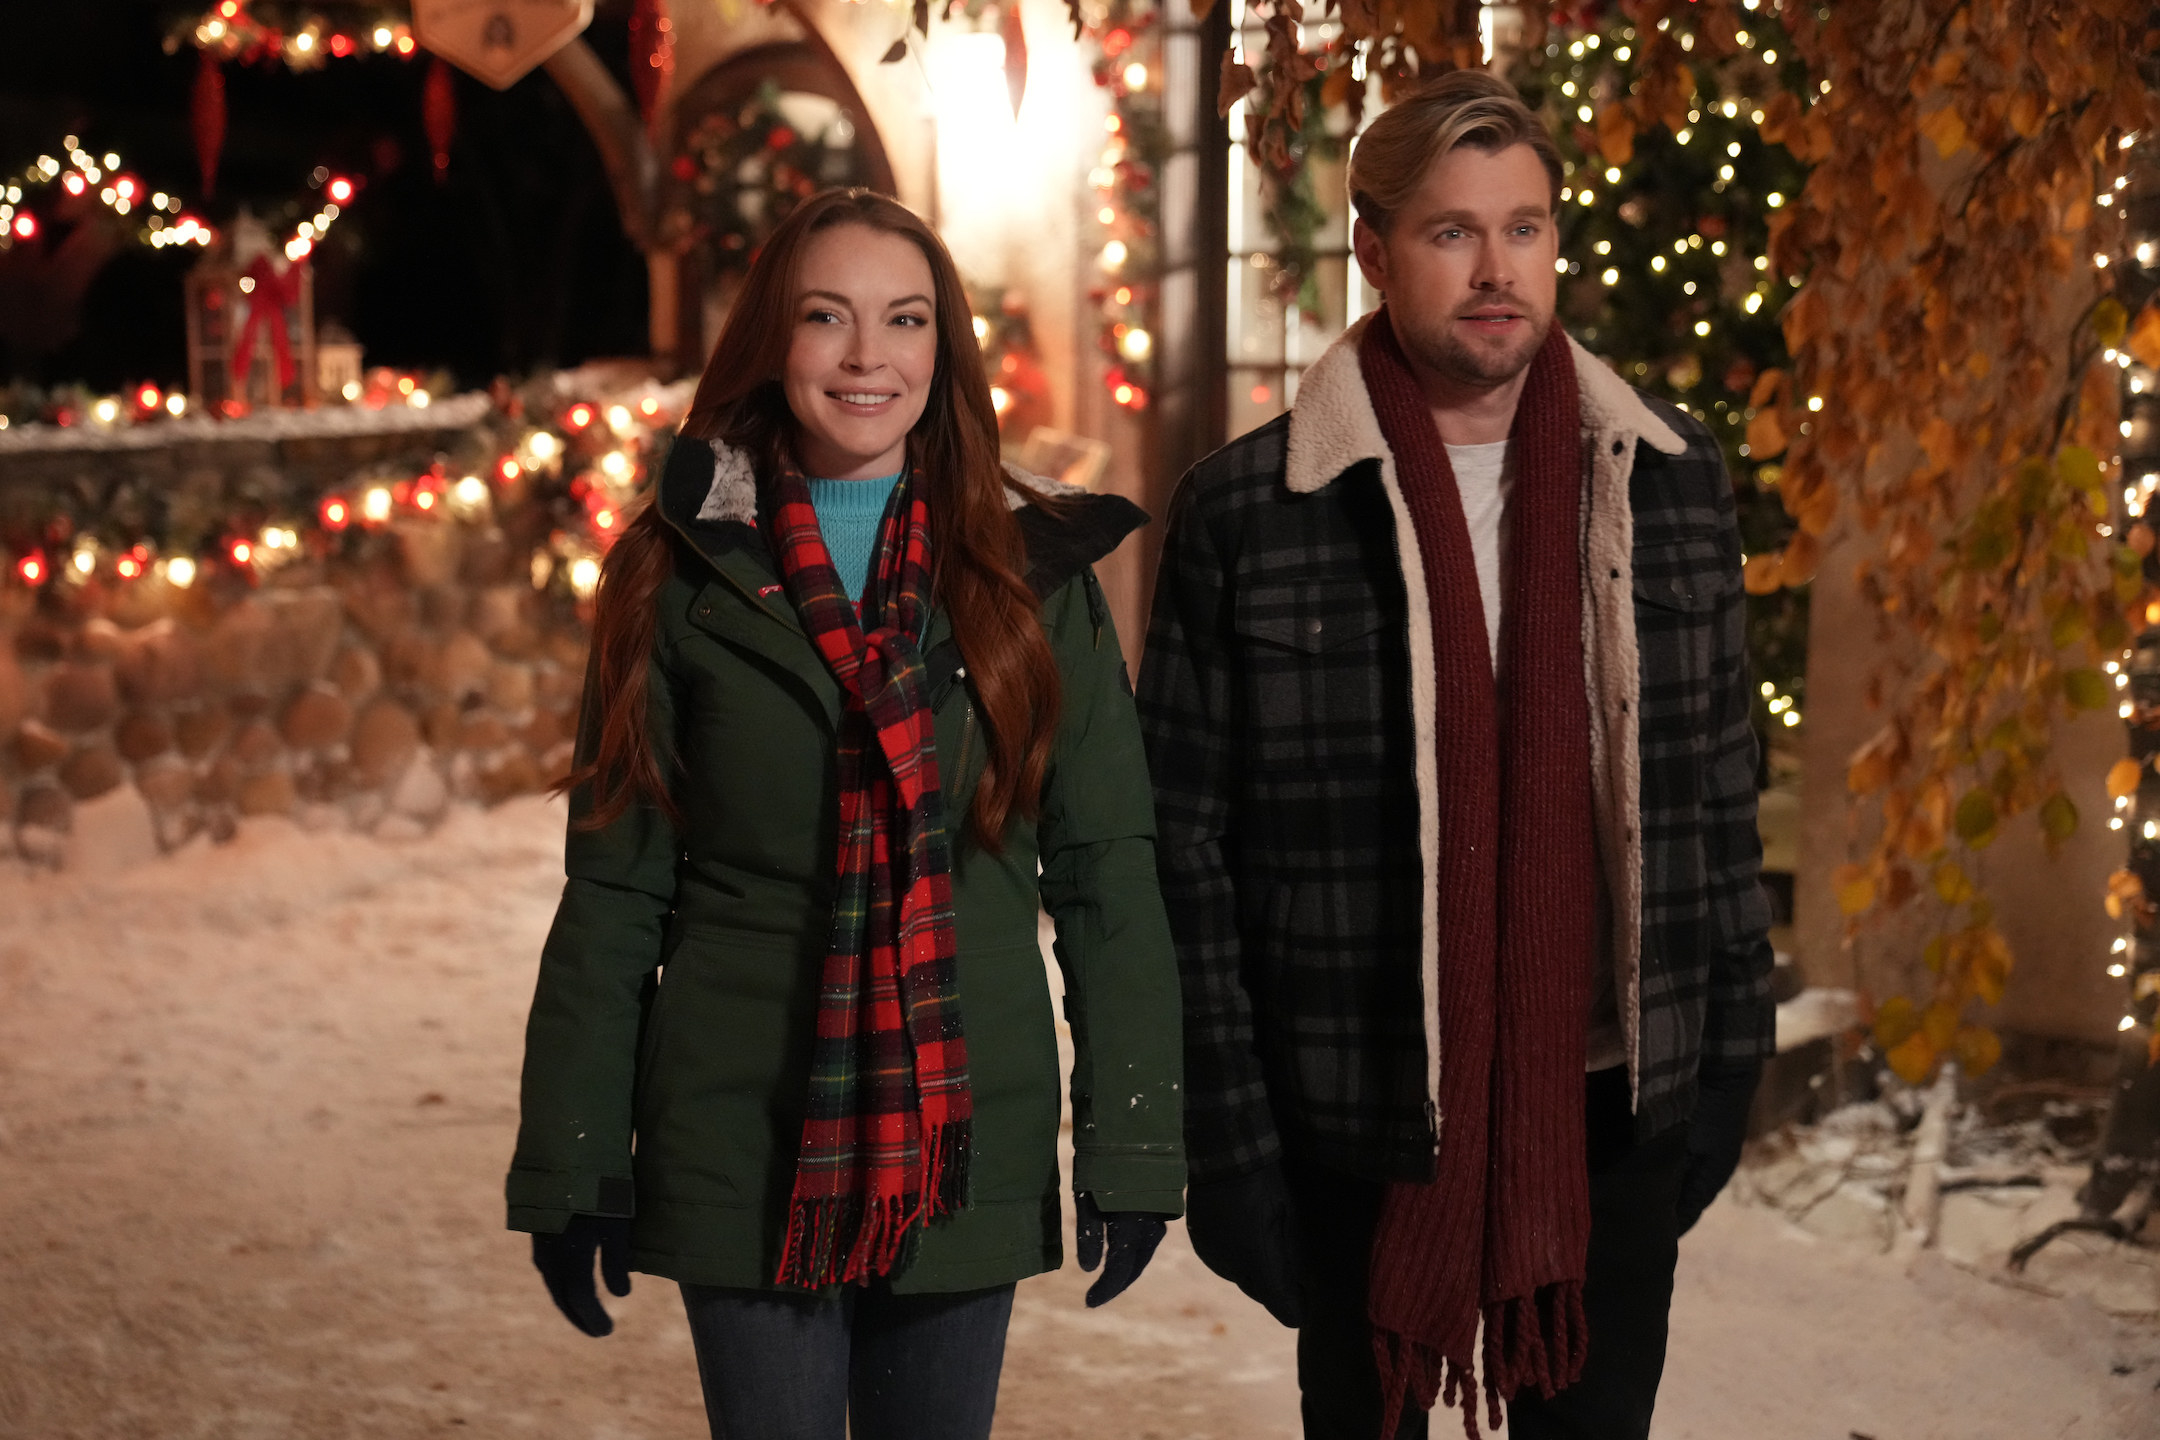 Lindsay Lohan and Chord Overstreet walking through a snow-covered town